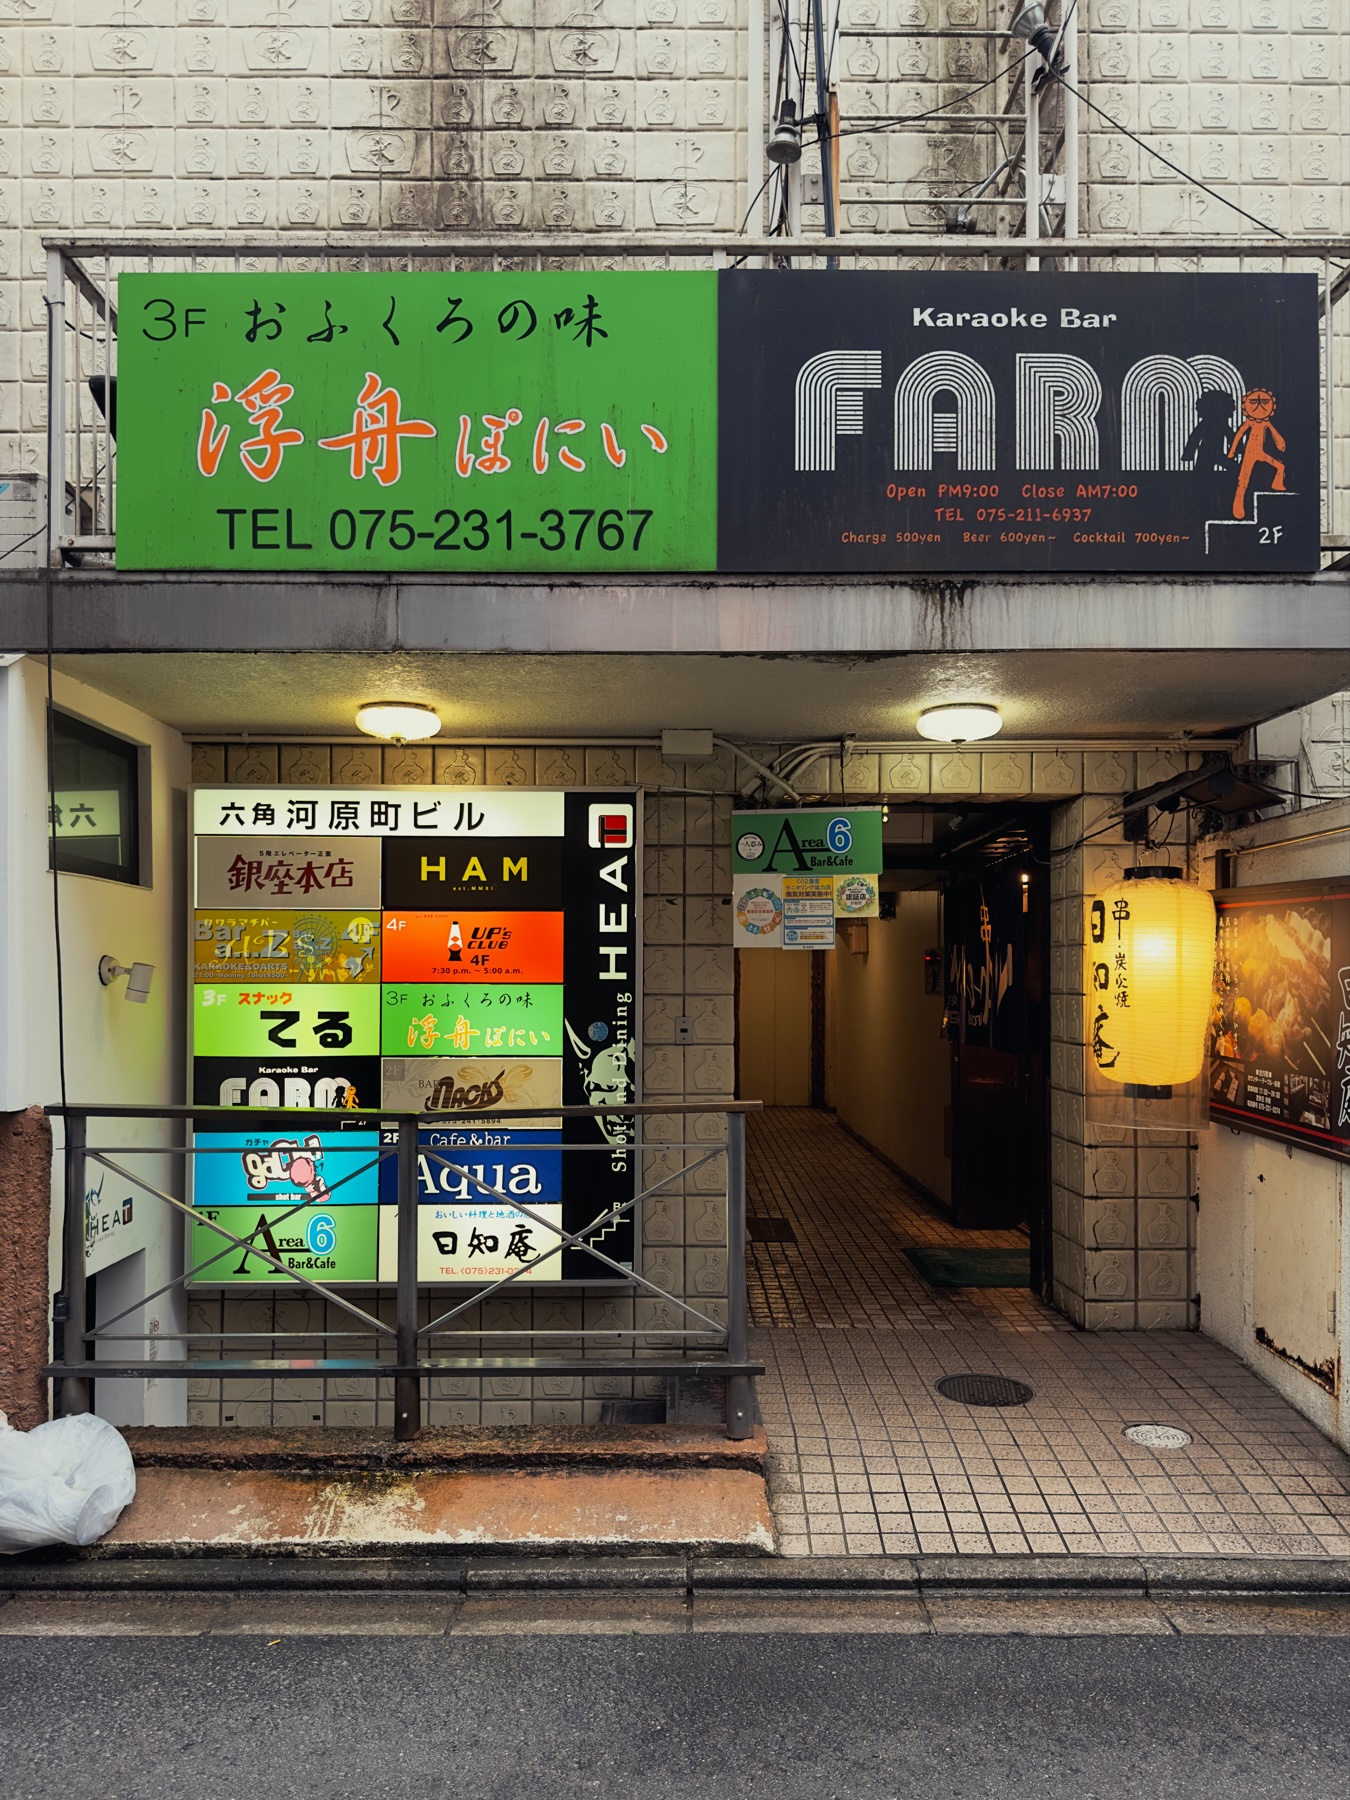 An example of a small Japanese building containing several businesses with colourful signs outside